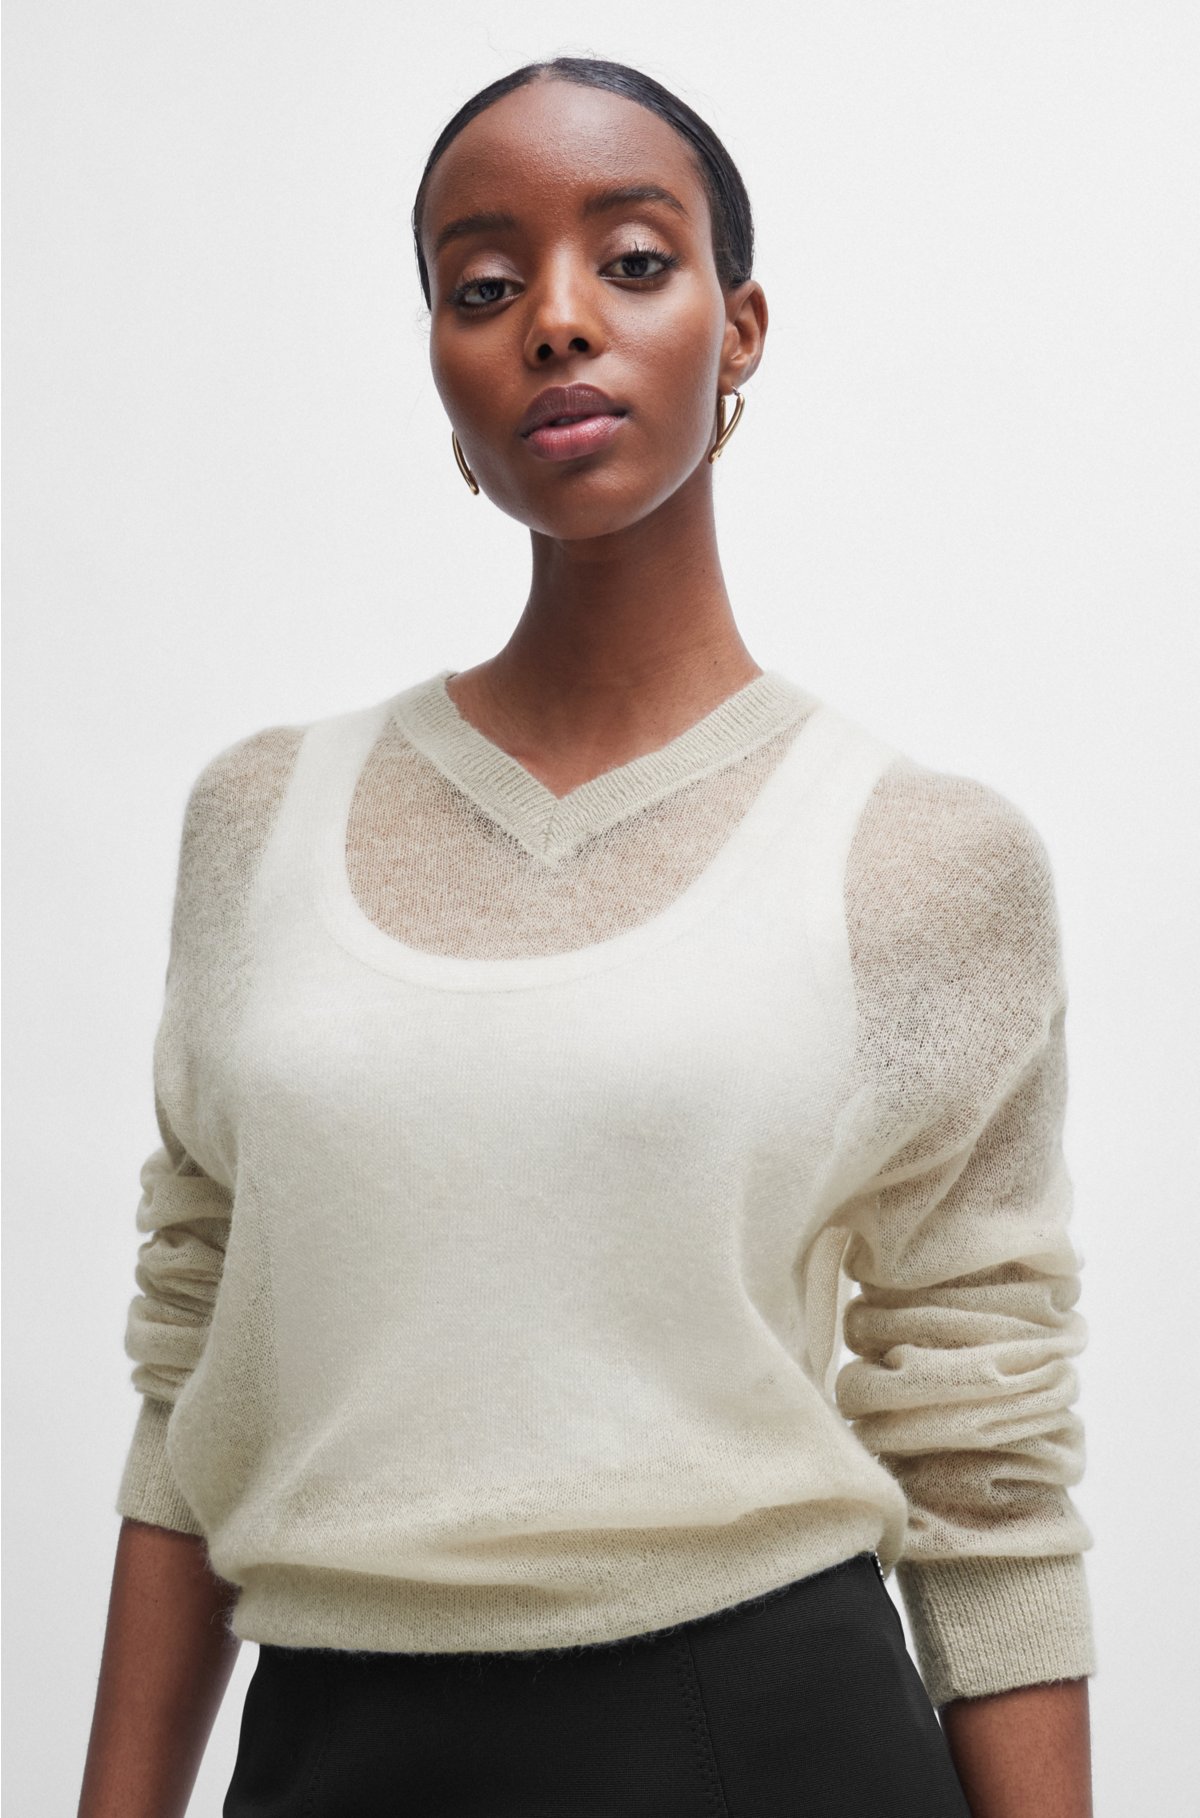 V-neck sweater in a sheer knit